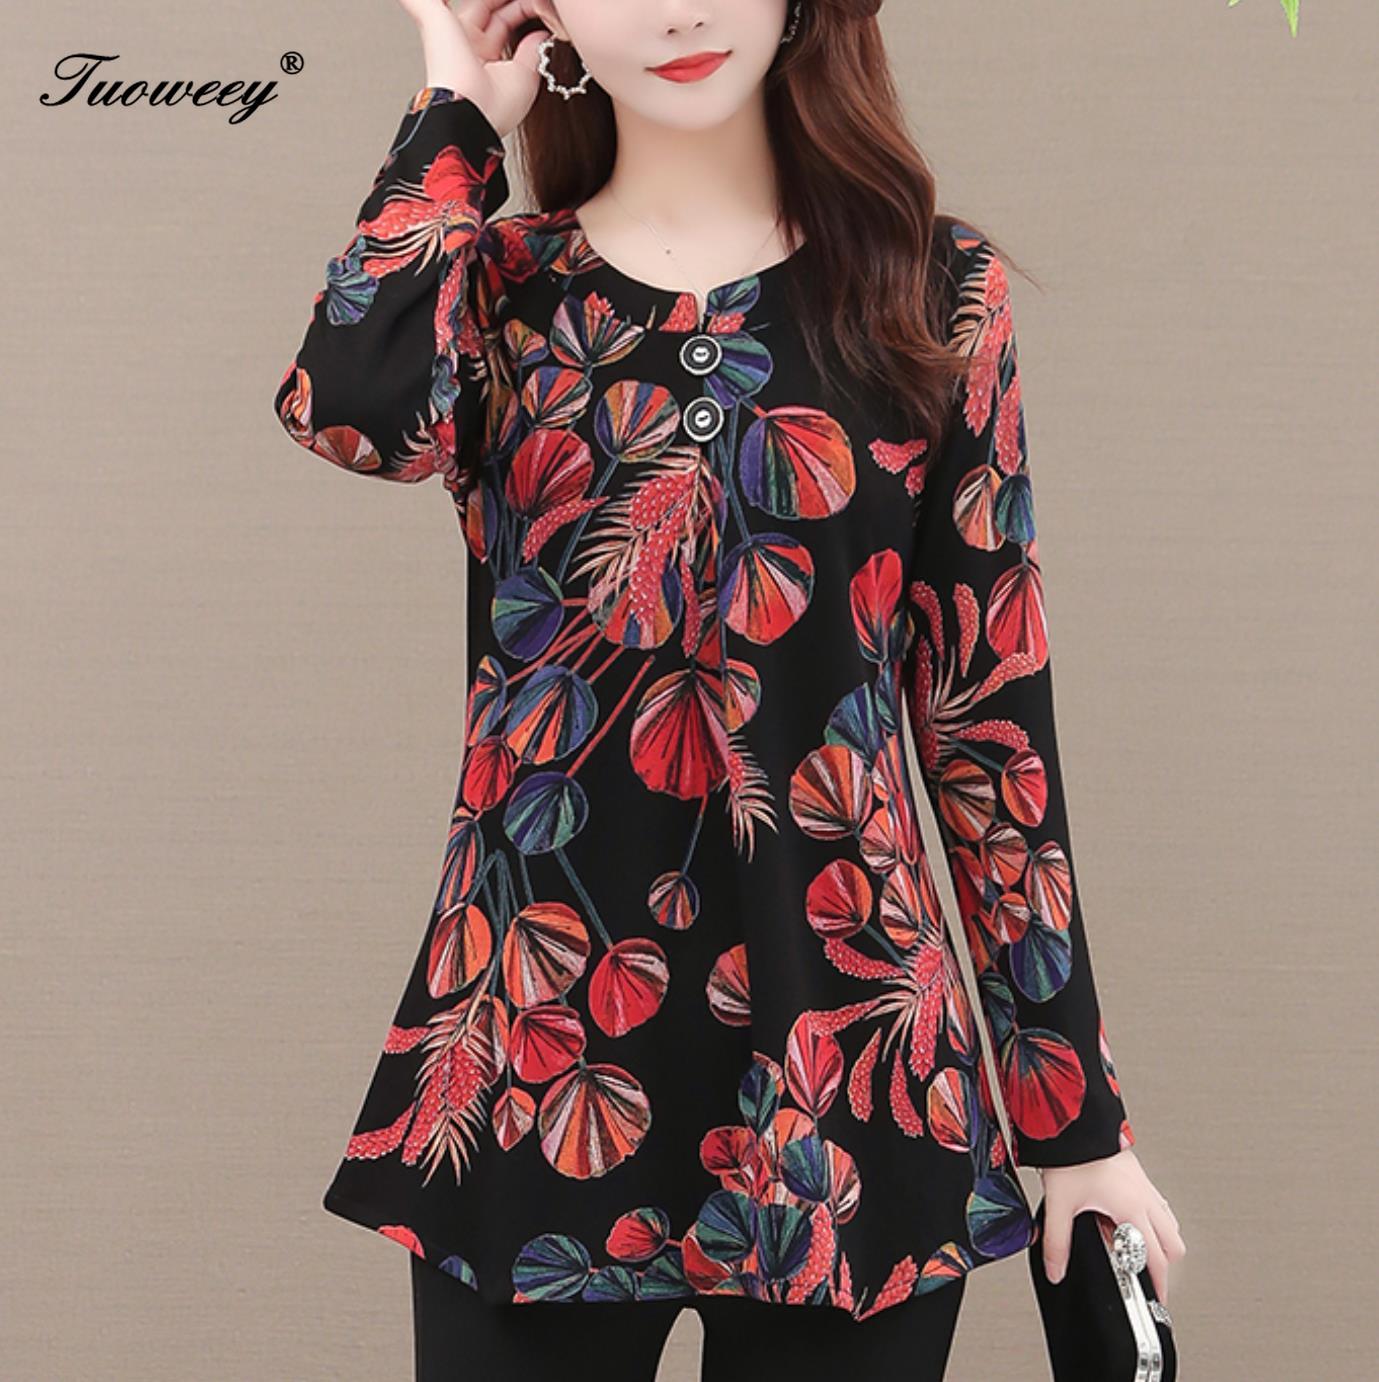 elegant plus size 5XL mom Women Spring Autumn Style flower Blouses Shirts Casual Long Sleeve floral Spliced Blusas Tops